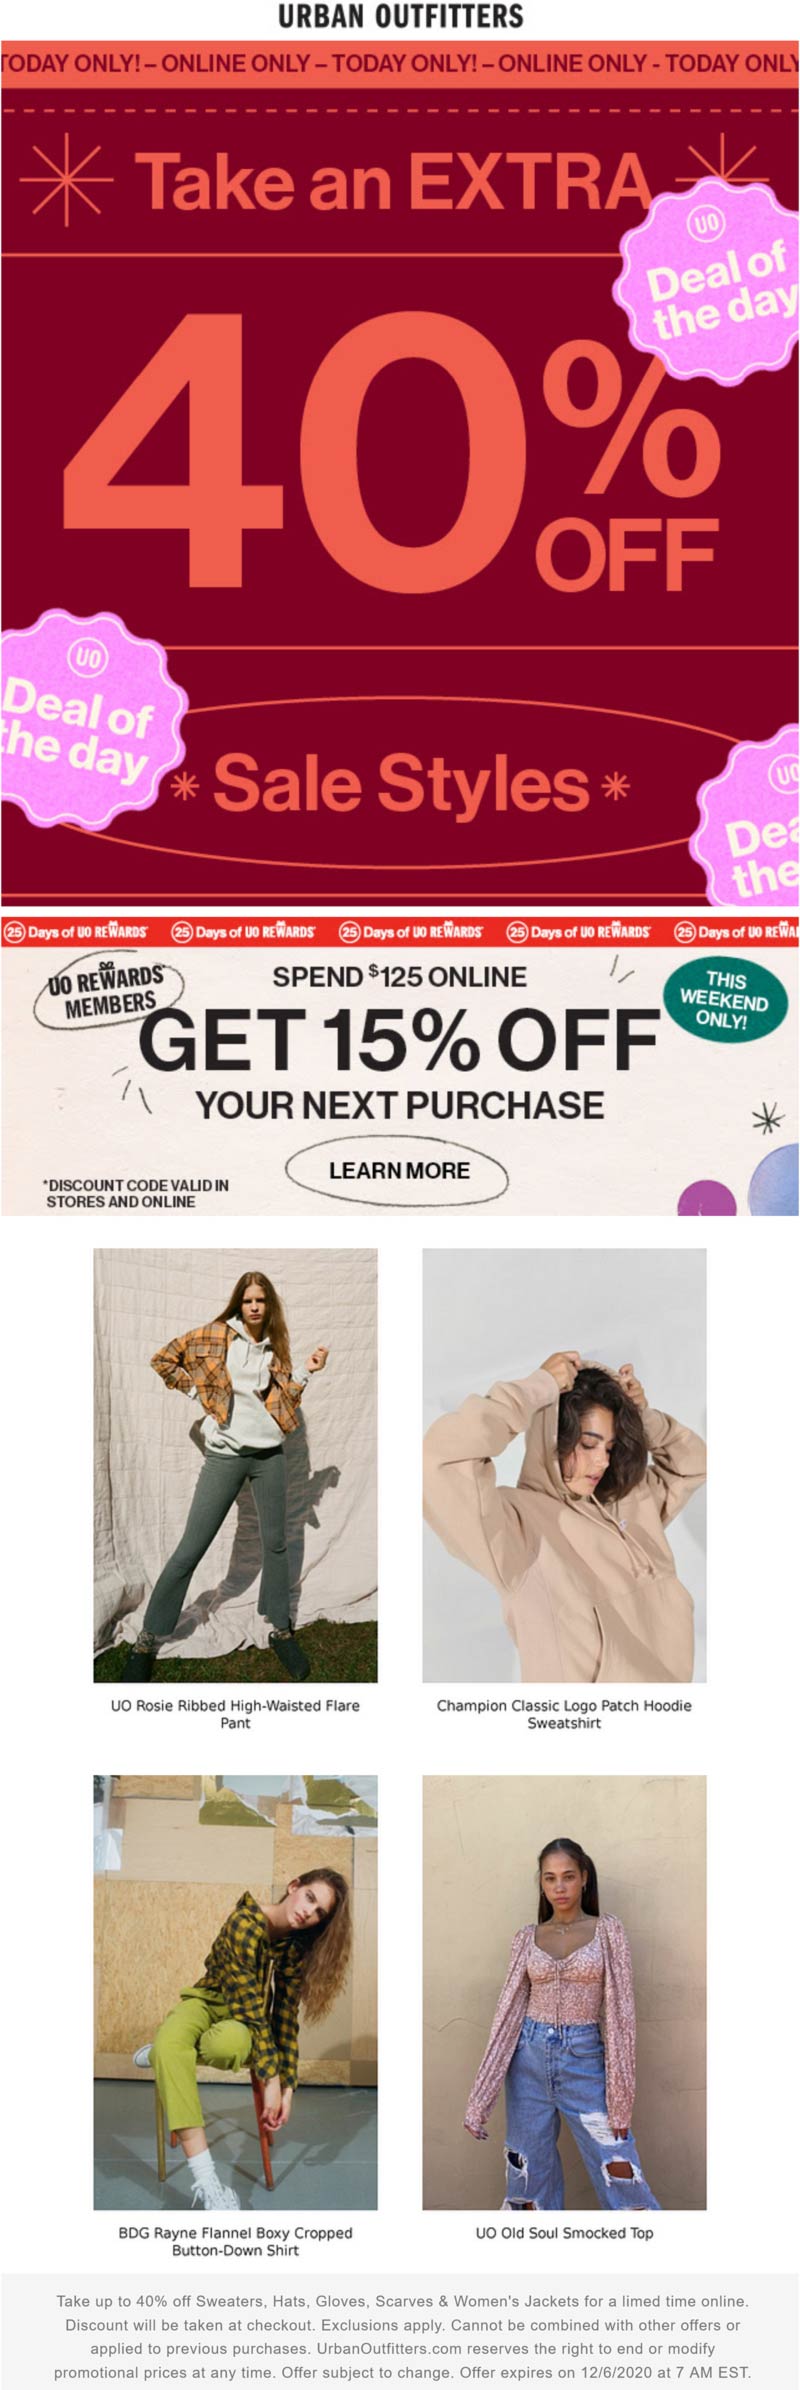 Urban Outfitters stores Coupon  Extra 40% off sale items online today at Urban Outfitters #urbanoutfitters 